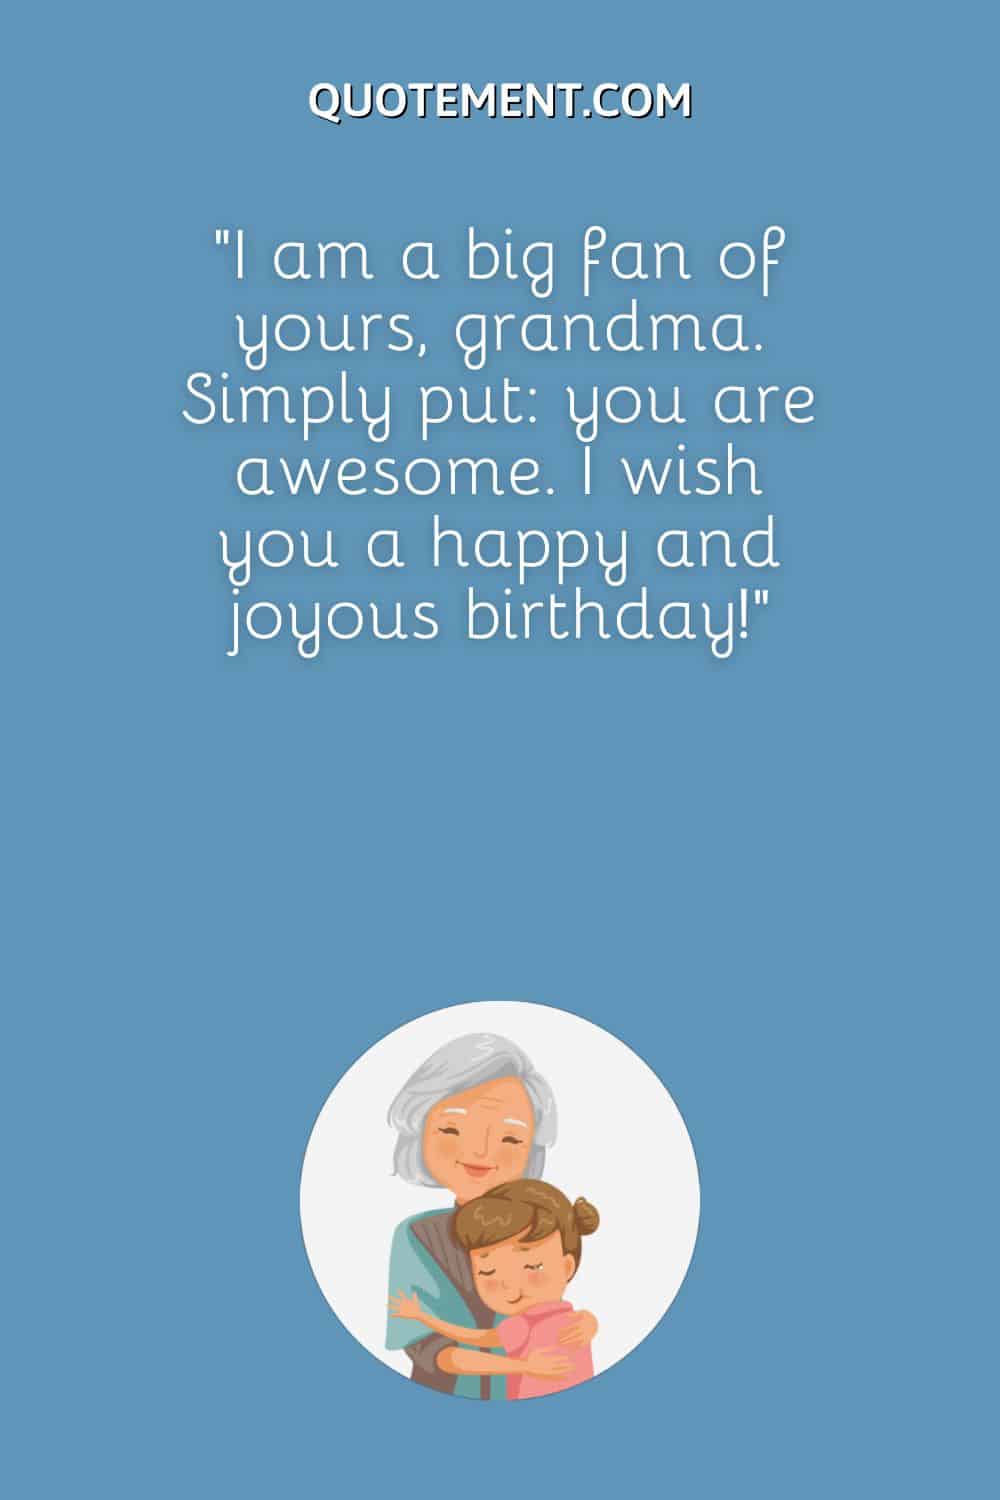 I am a big fan of yours, grandma. Simply put you are awesome